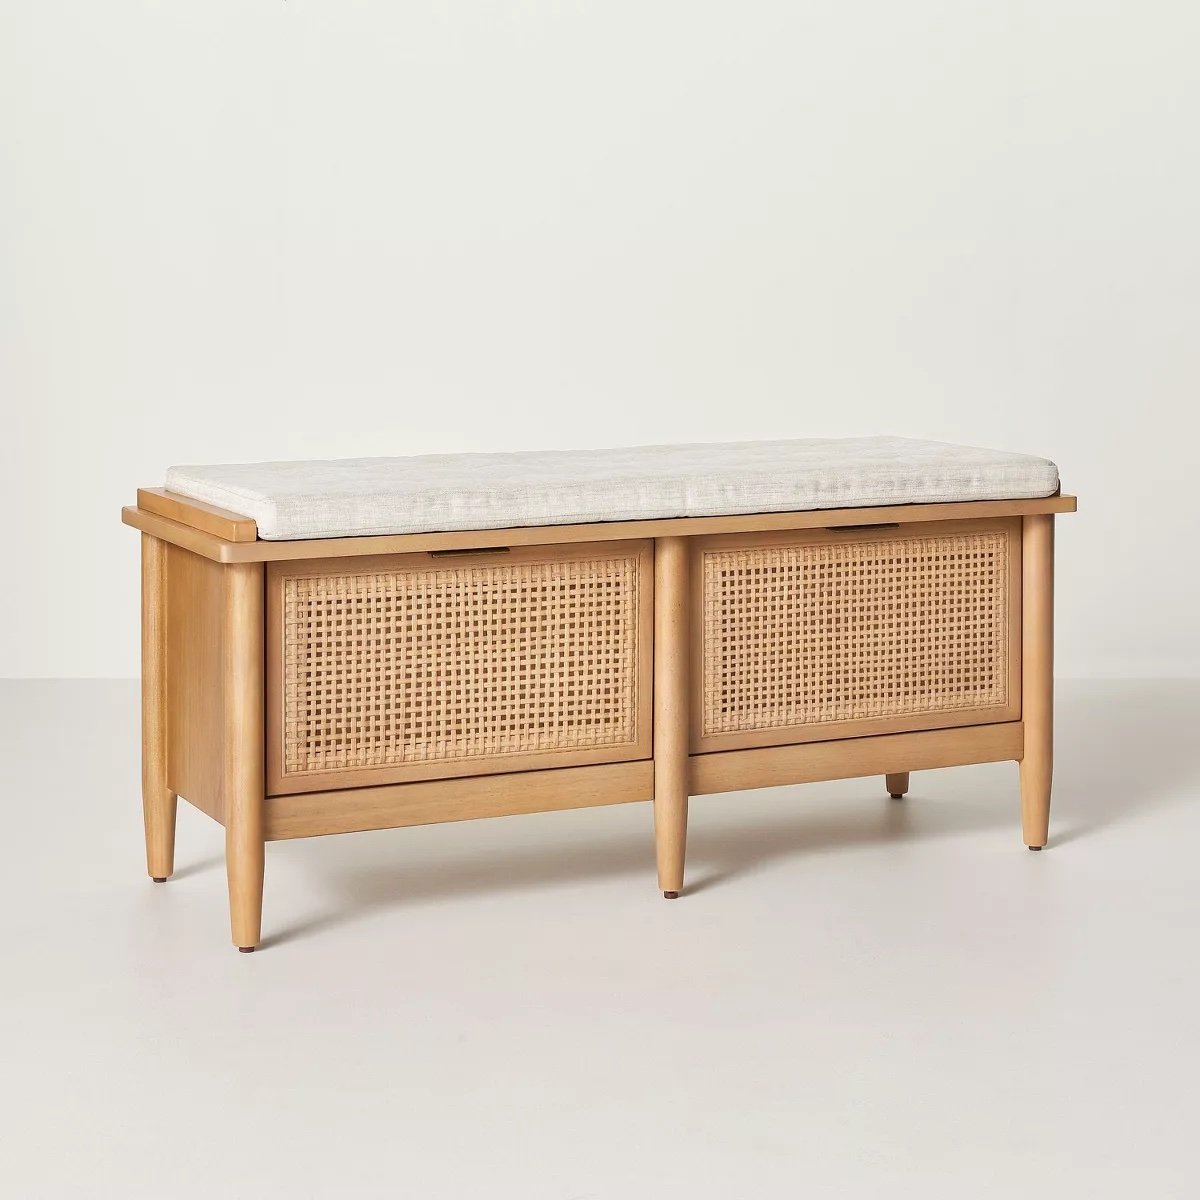 Caned Entryway Storage Bench by Magnolia